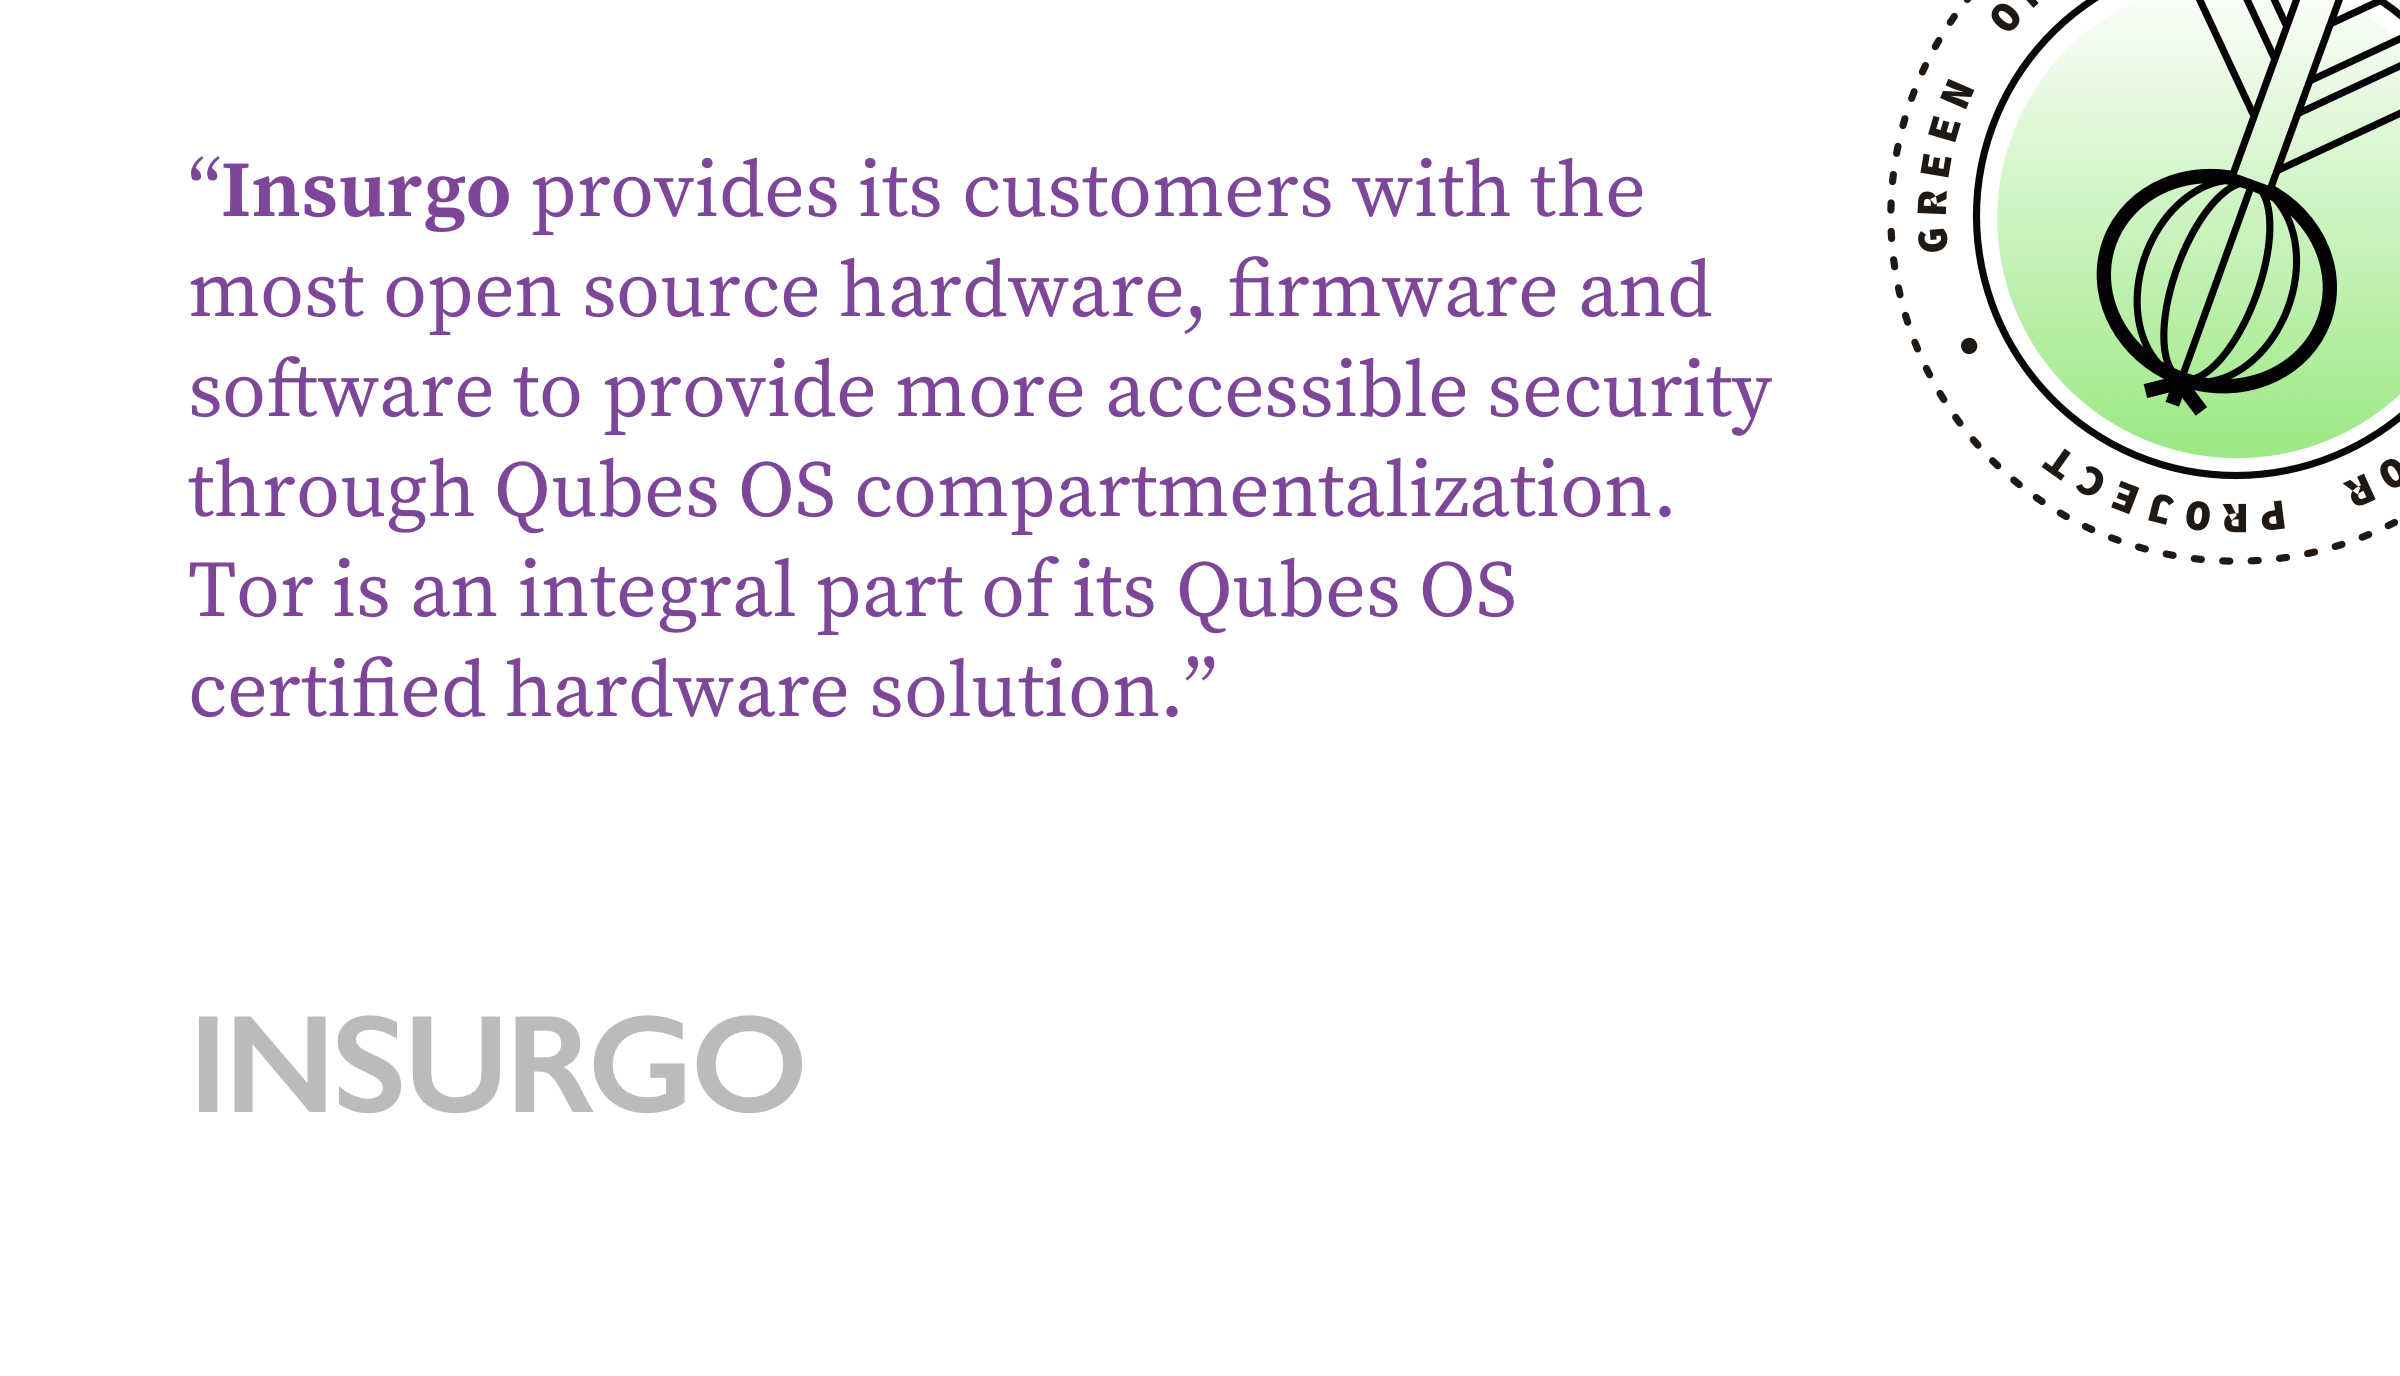 Insurgo provides its customers with the most open source hardware, firmware and software to provide more accessible security through Qubes OS compartmentalization. Tor is an integral part of its Qubes OS certified hardware solution.